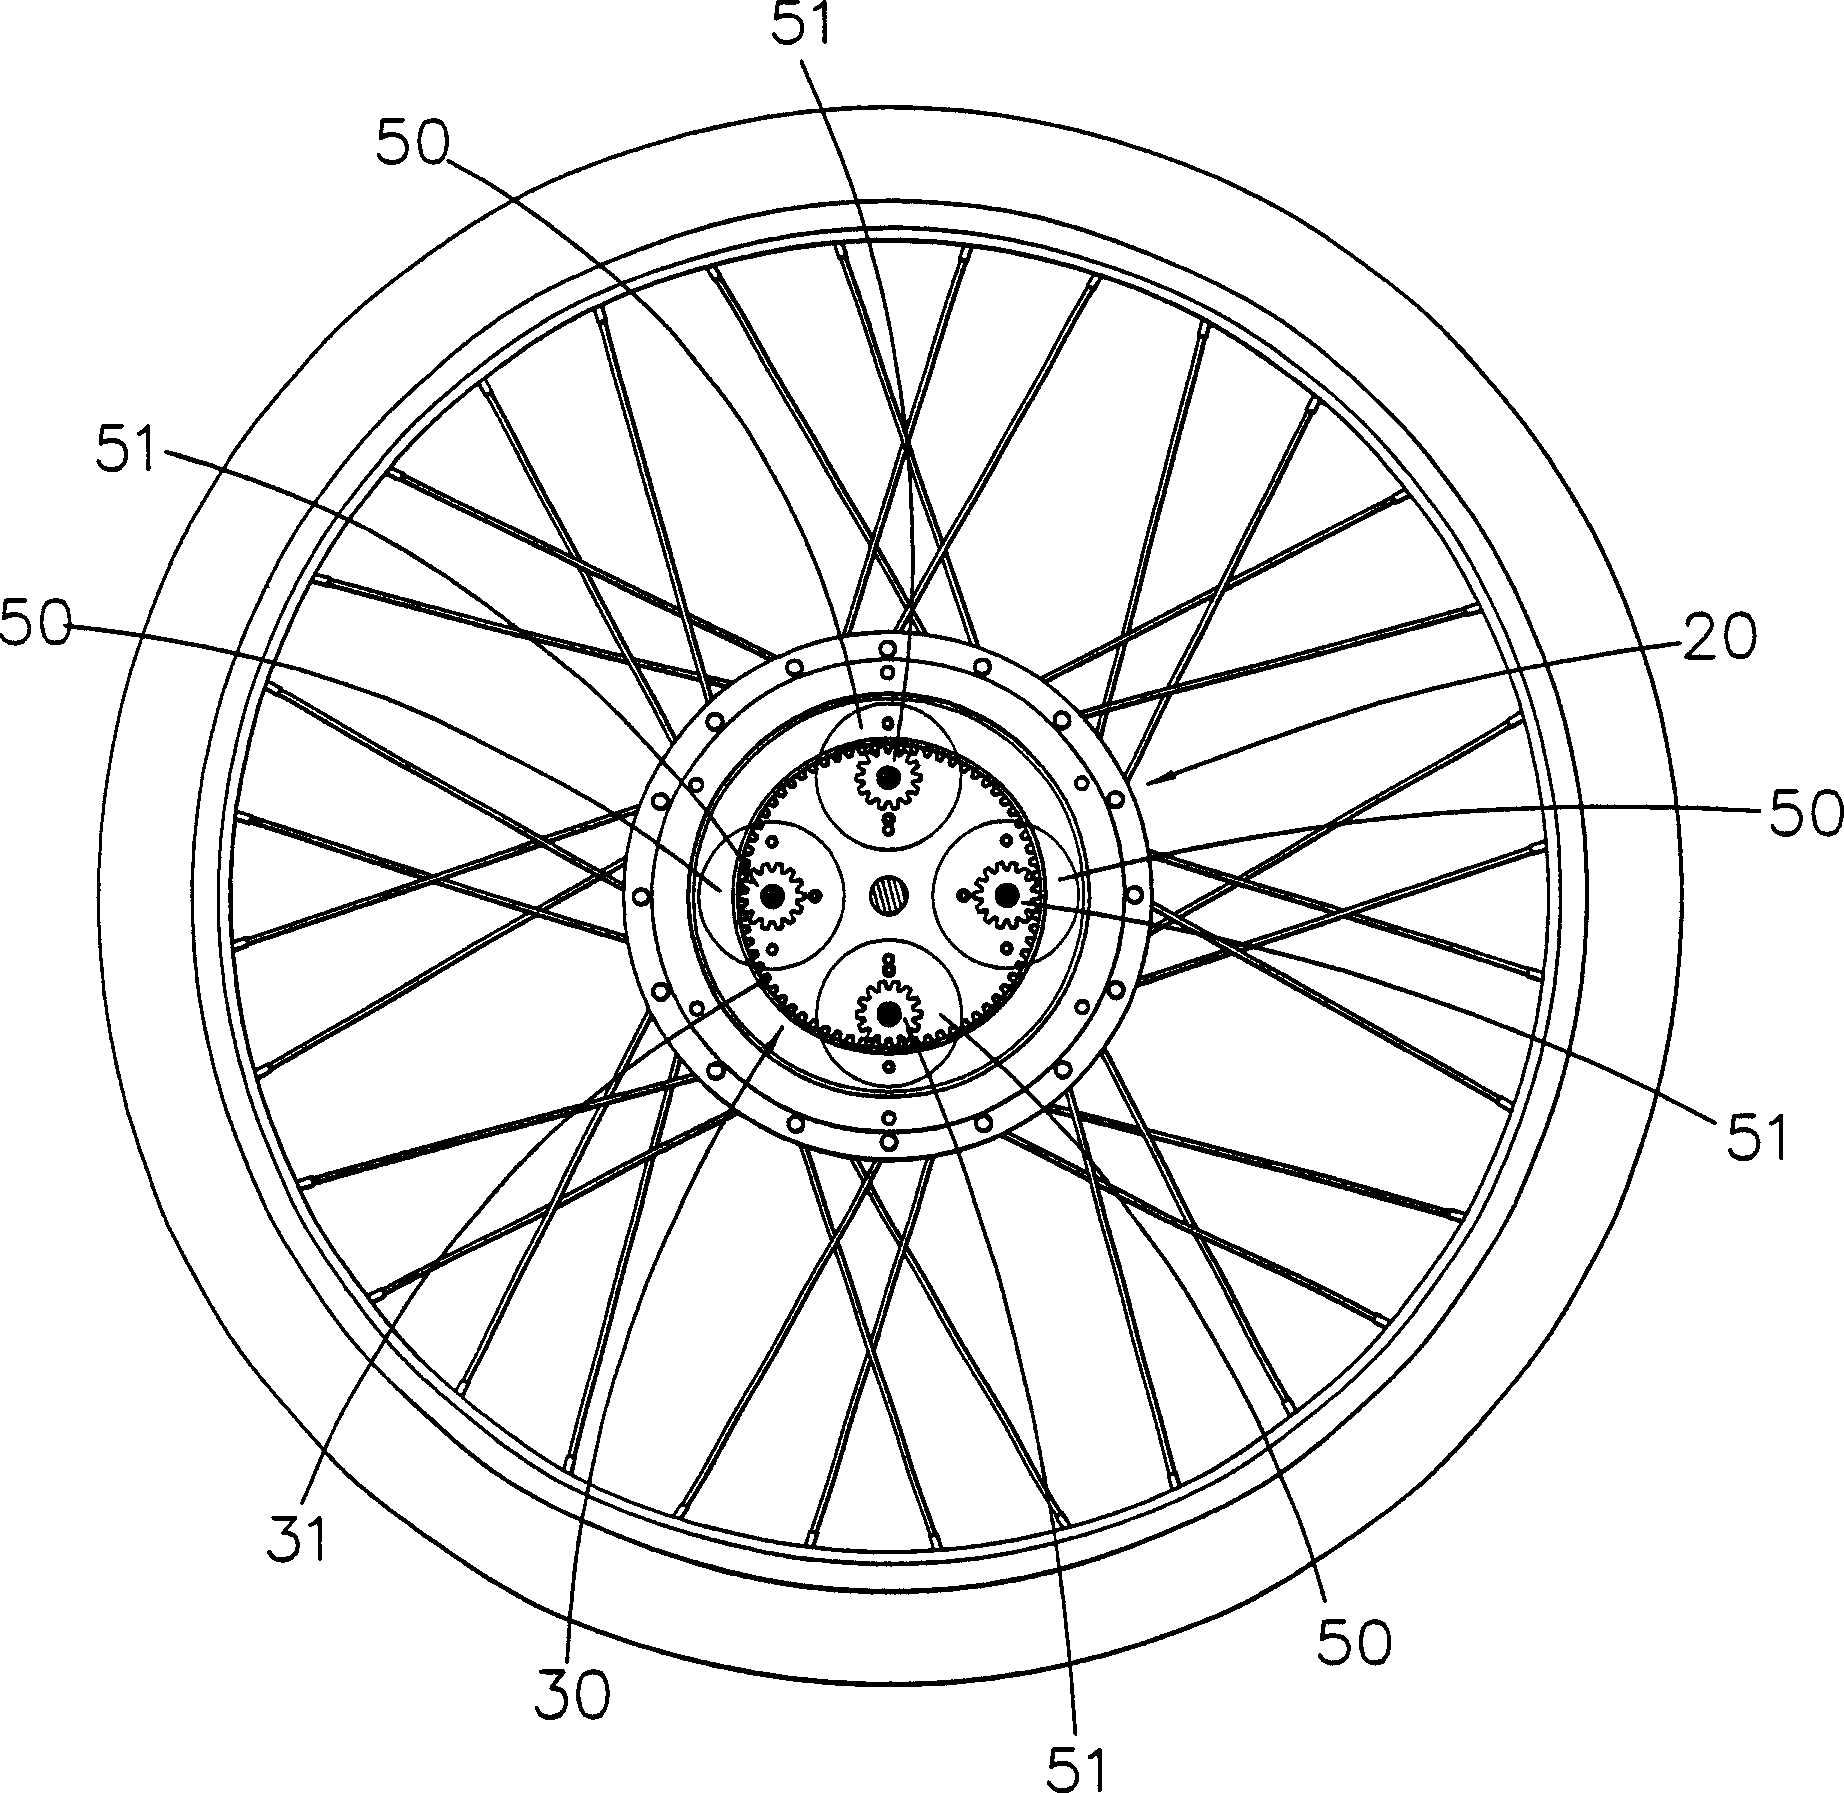 A structure for making up wheel hub by multiple motors